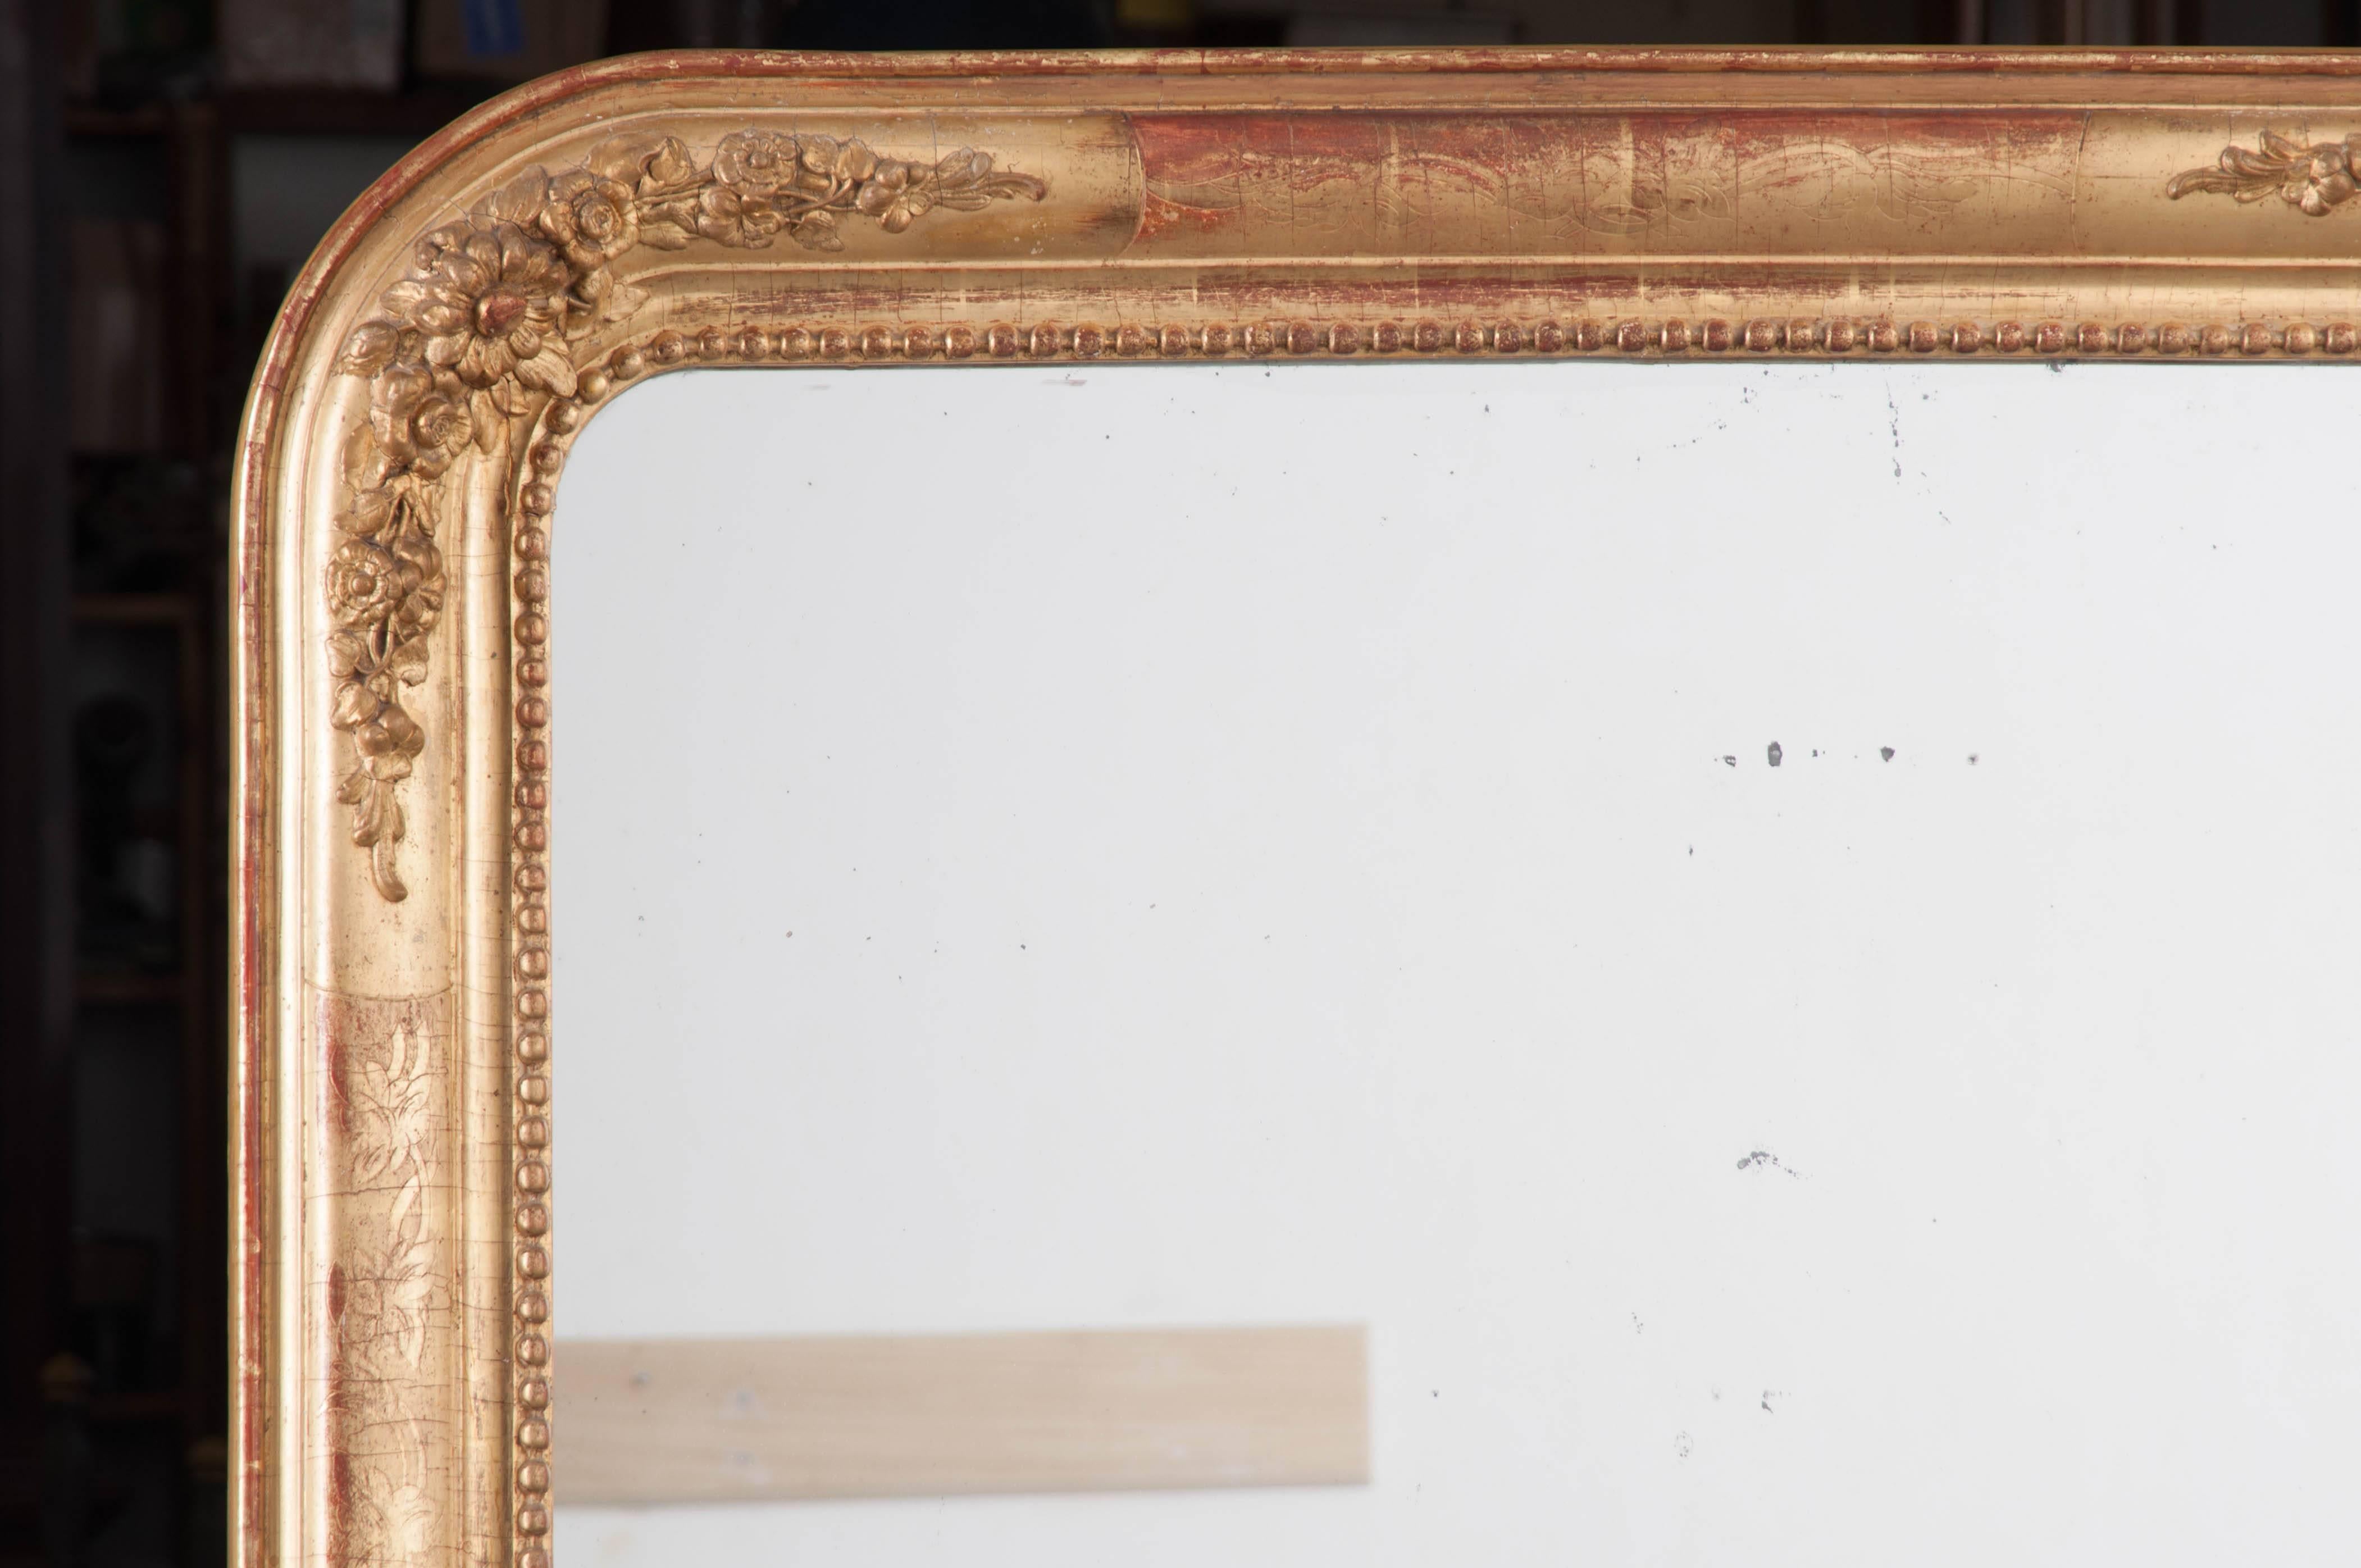 A lovely Louis Philippe gold gilt mirror with pleasant floral ornamentation from 19th century, France. The frame has aged gracefully, with its red bole substratum becoming exposed after decades of feather dustings. The mirror's corners are